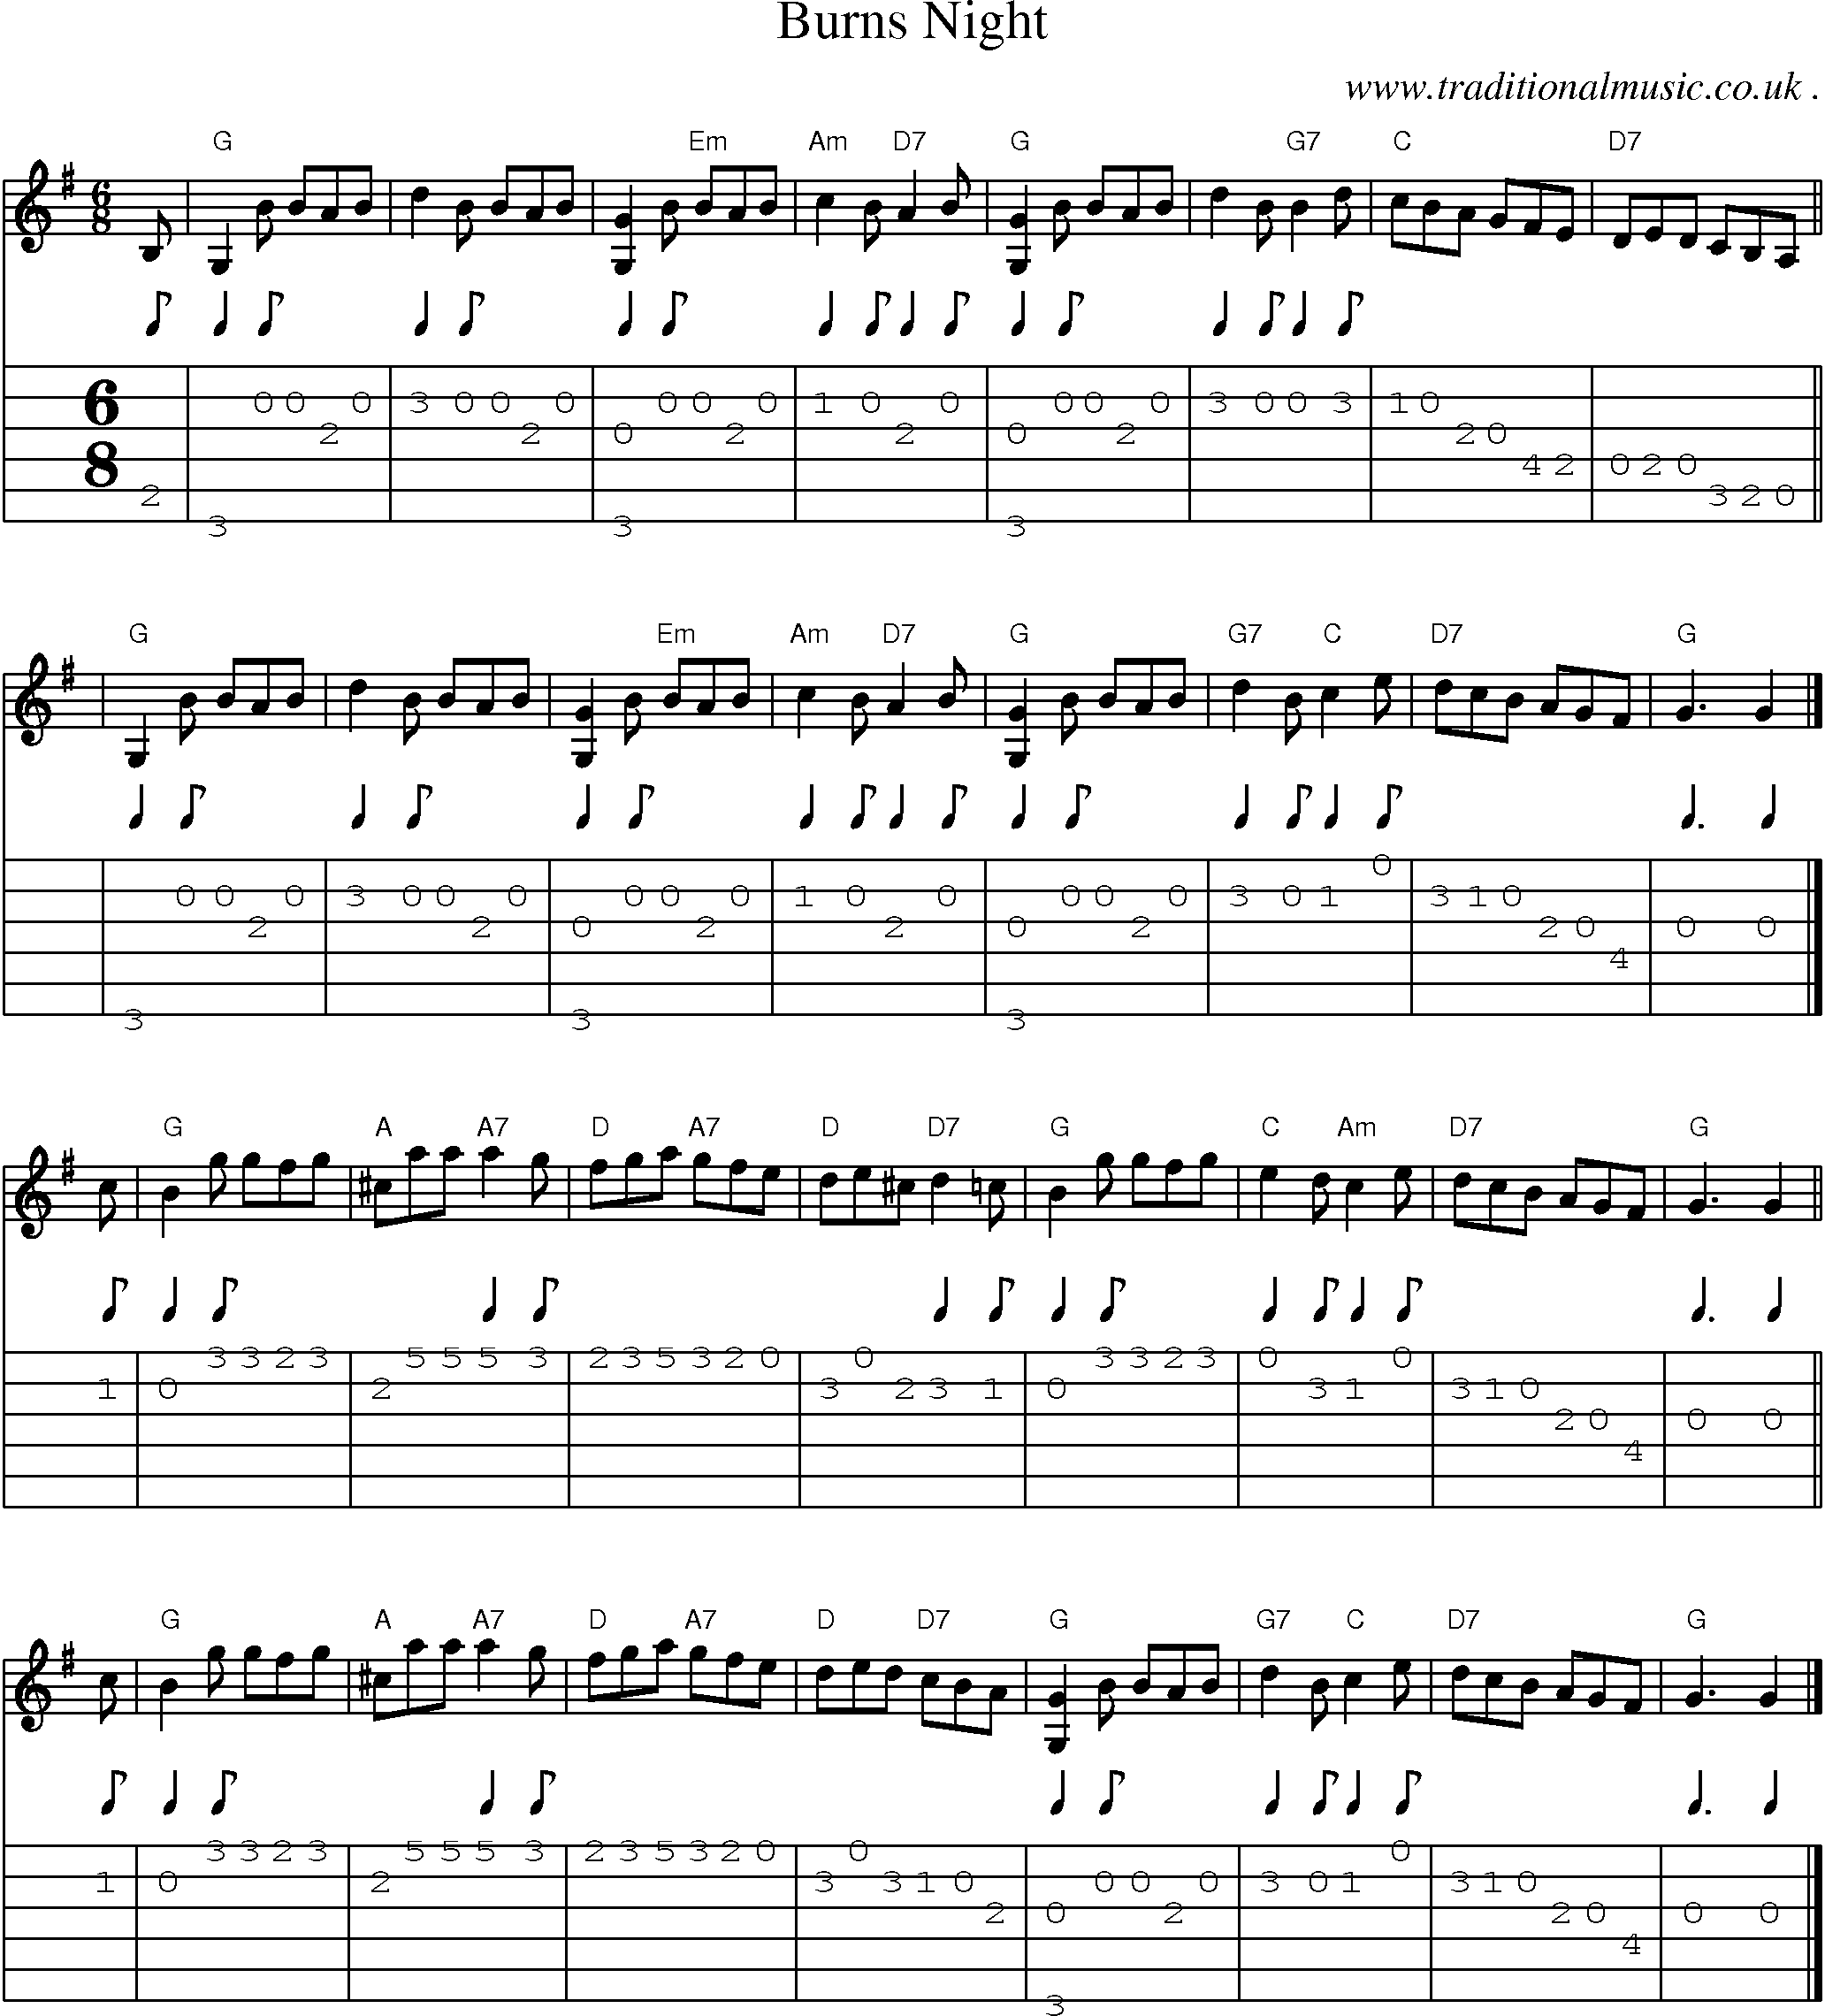 Sheet-music  score, Chords and Guitar Tabs for Burns Night